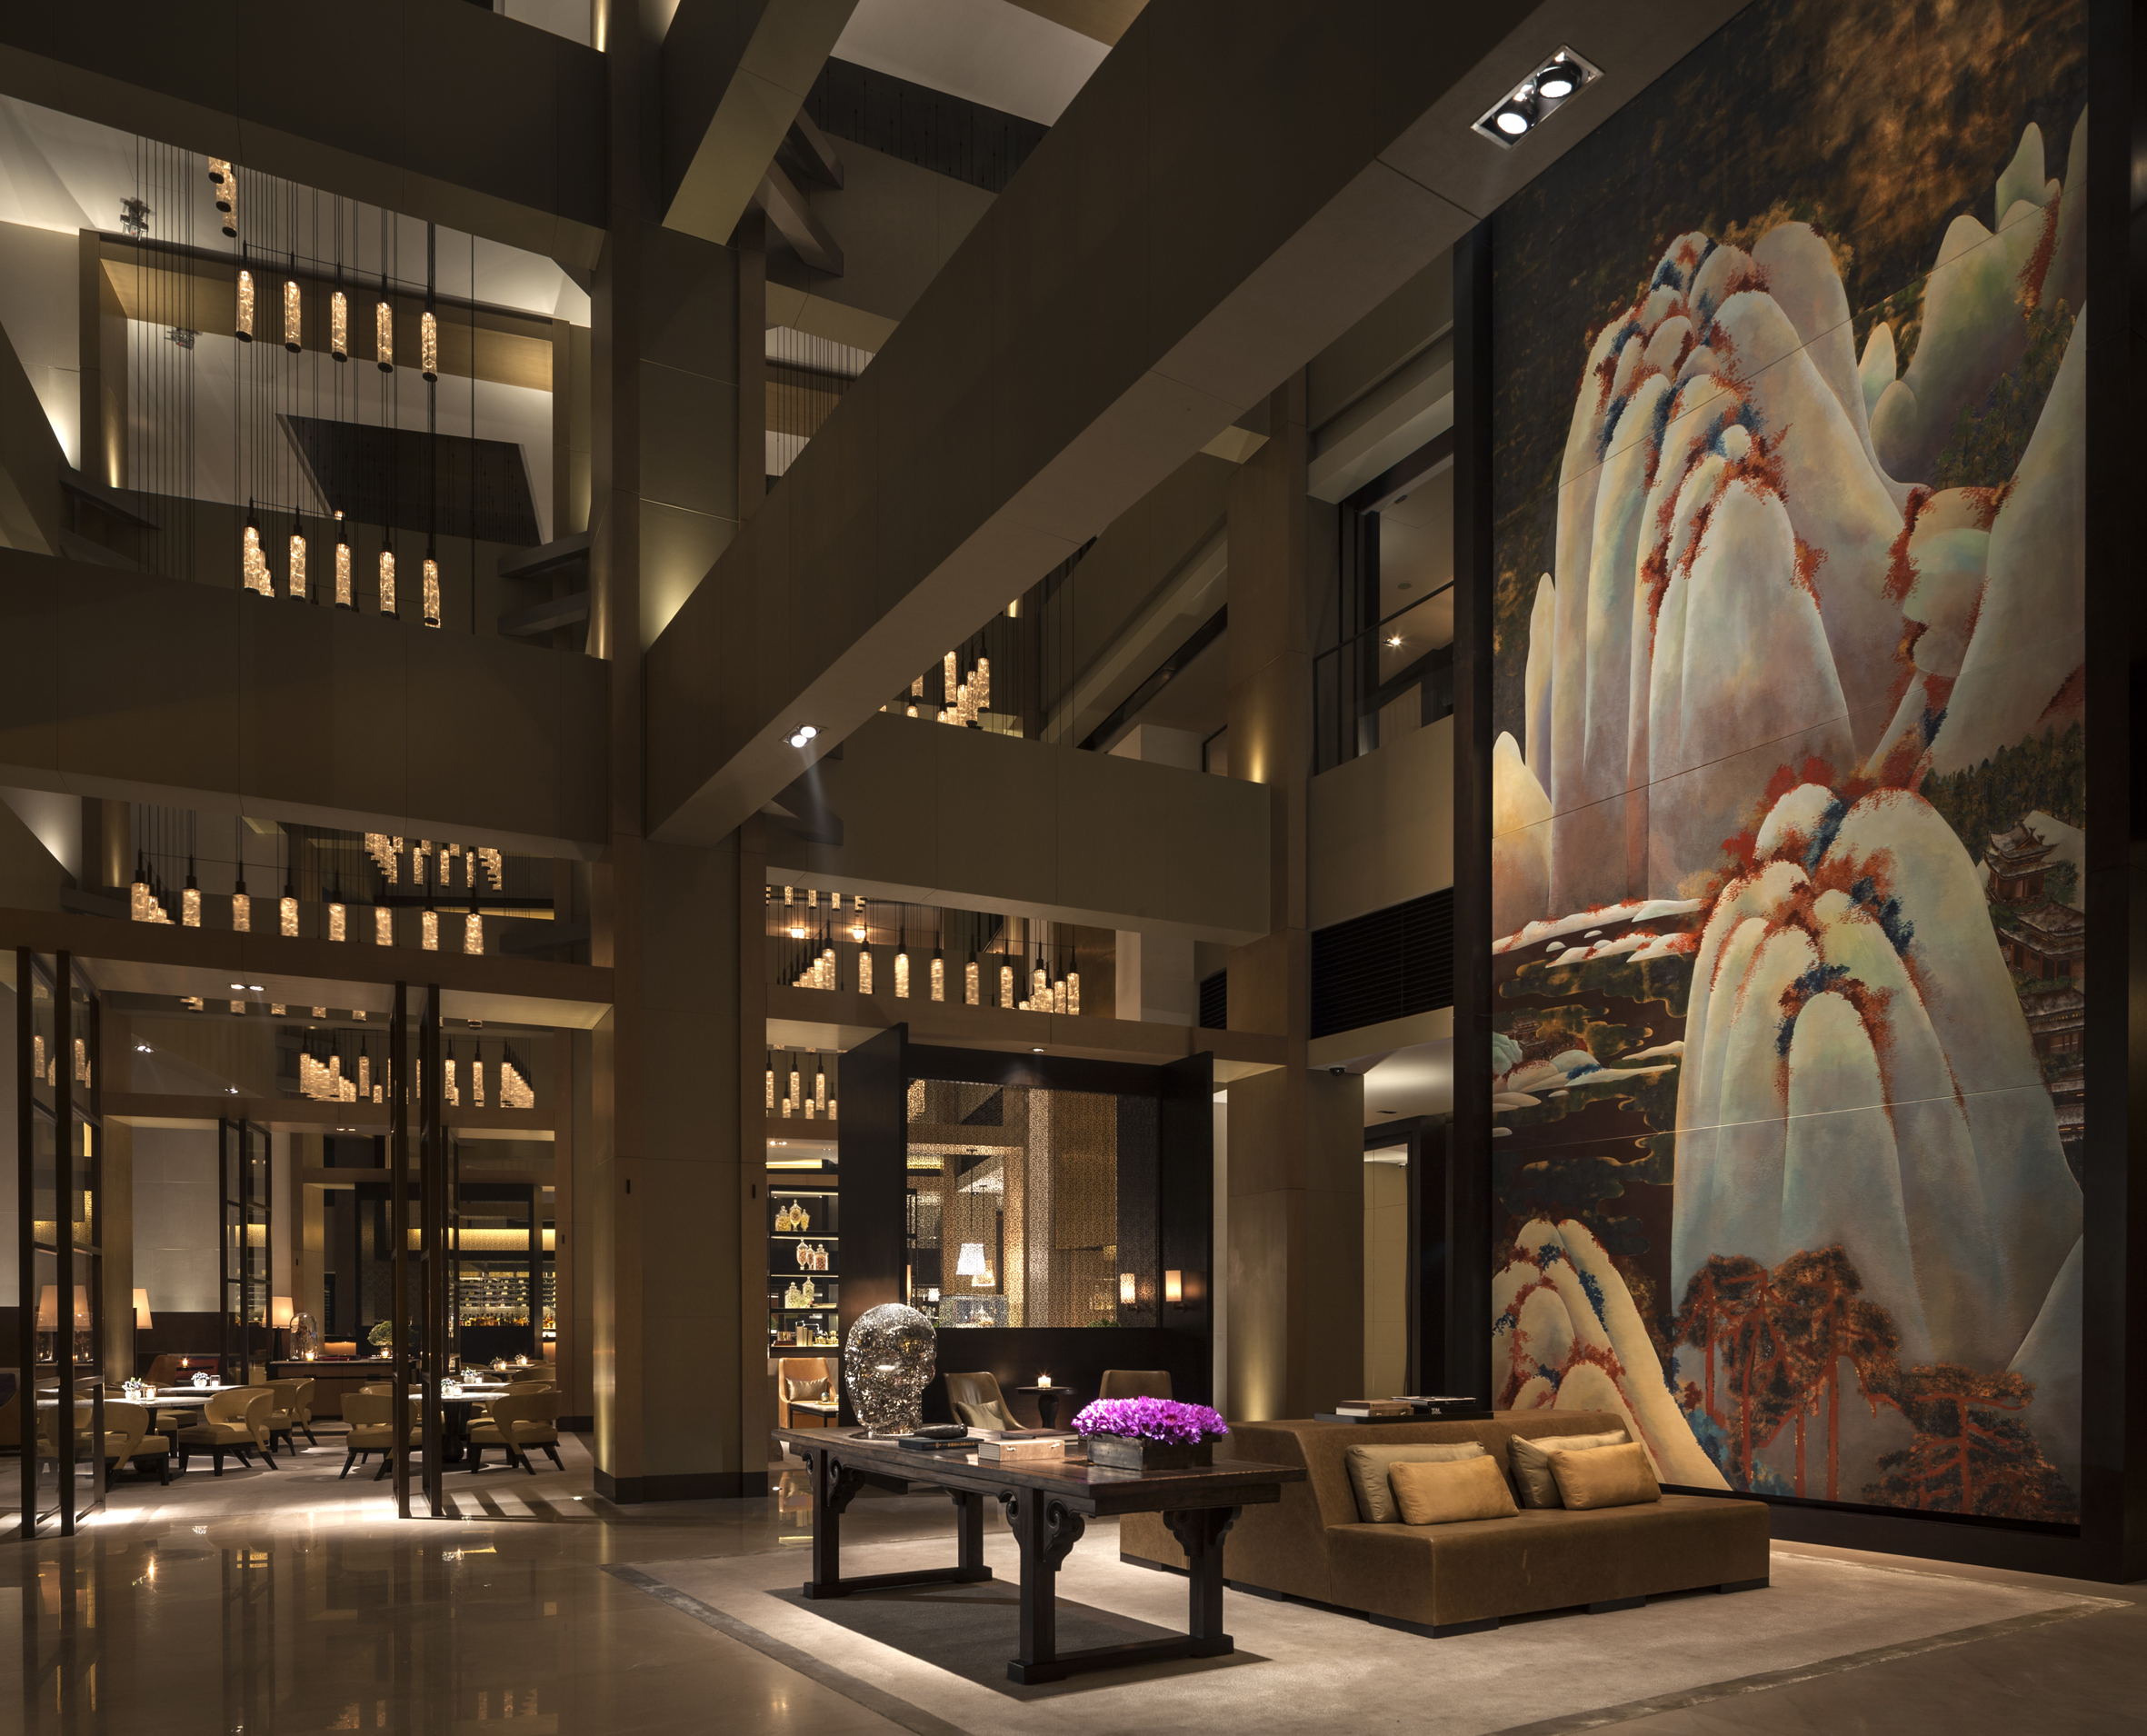 Lobby at the Rosewood Beijing China